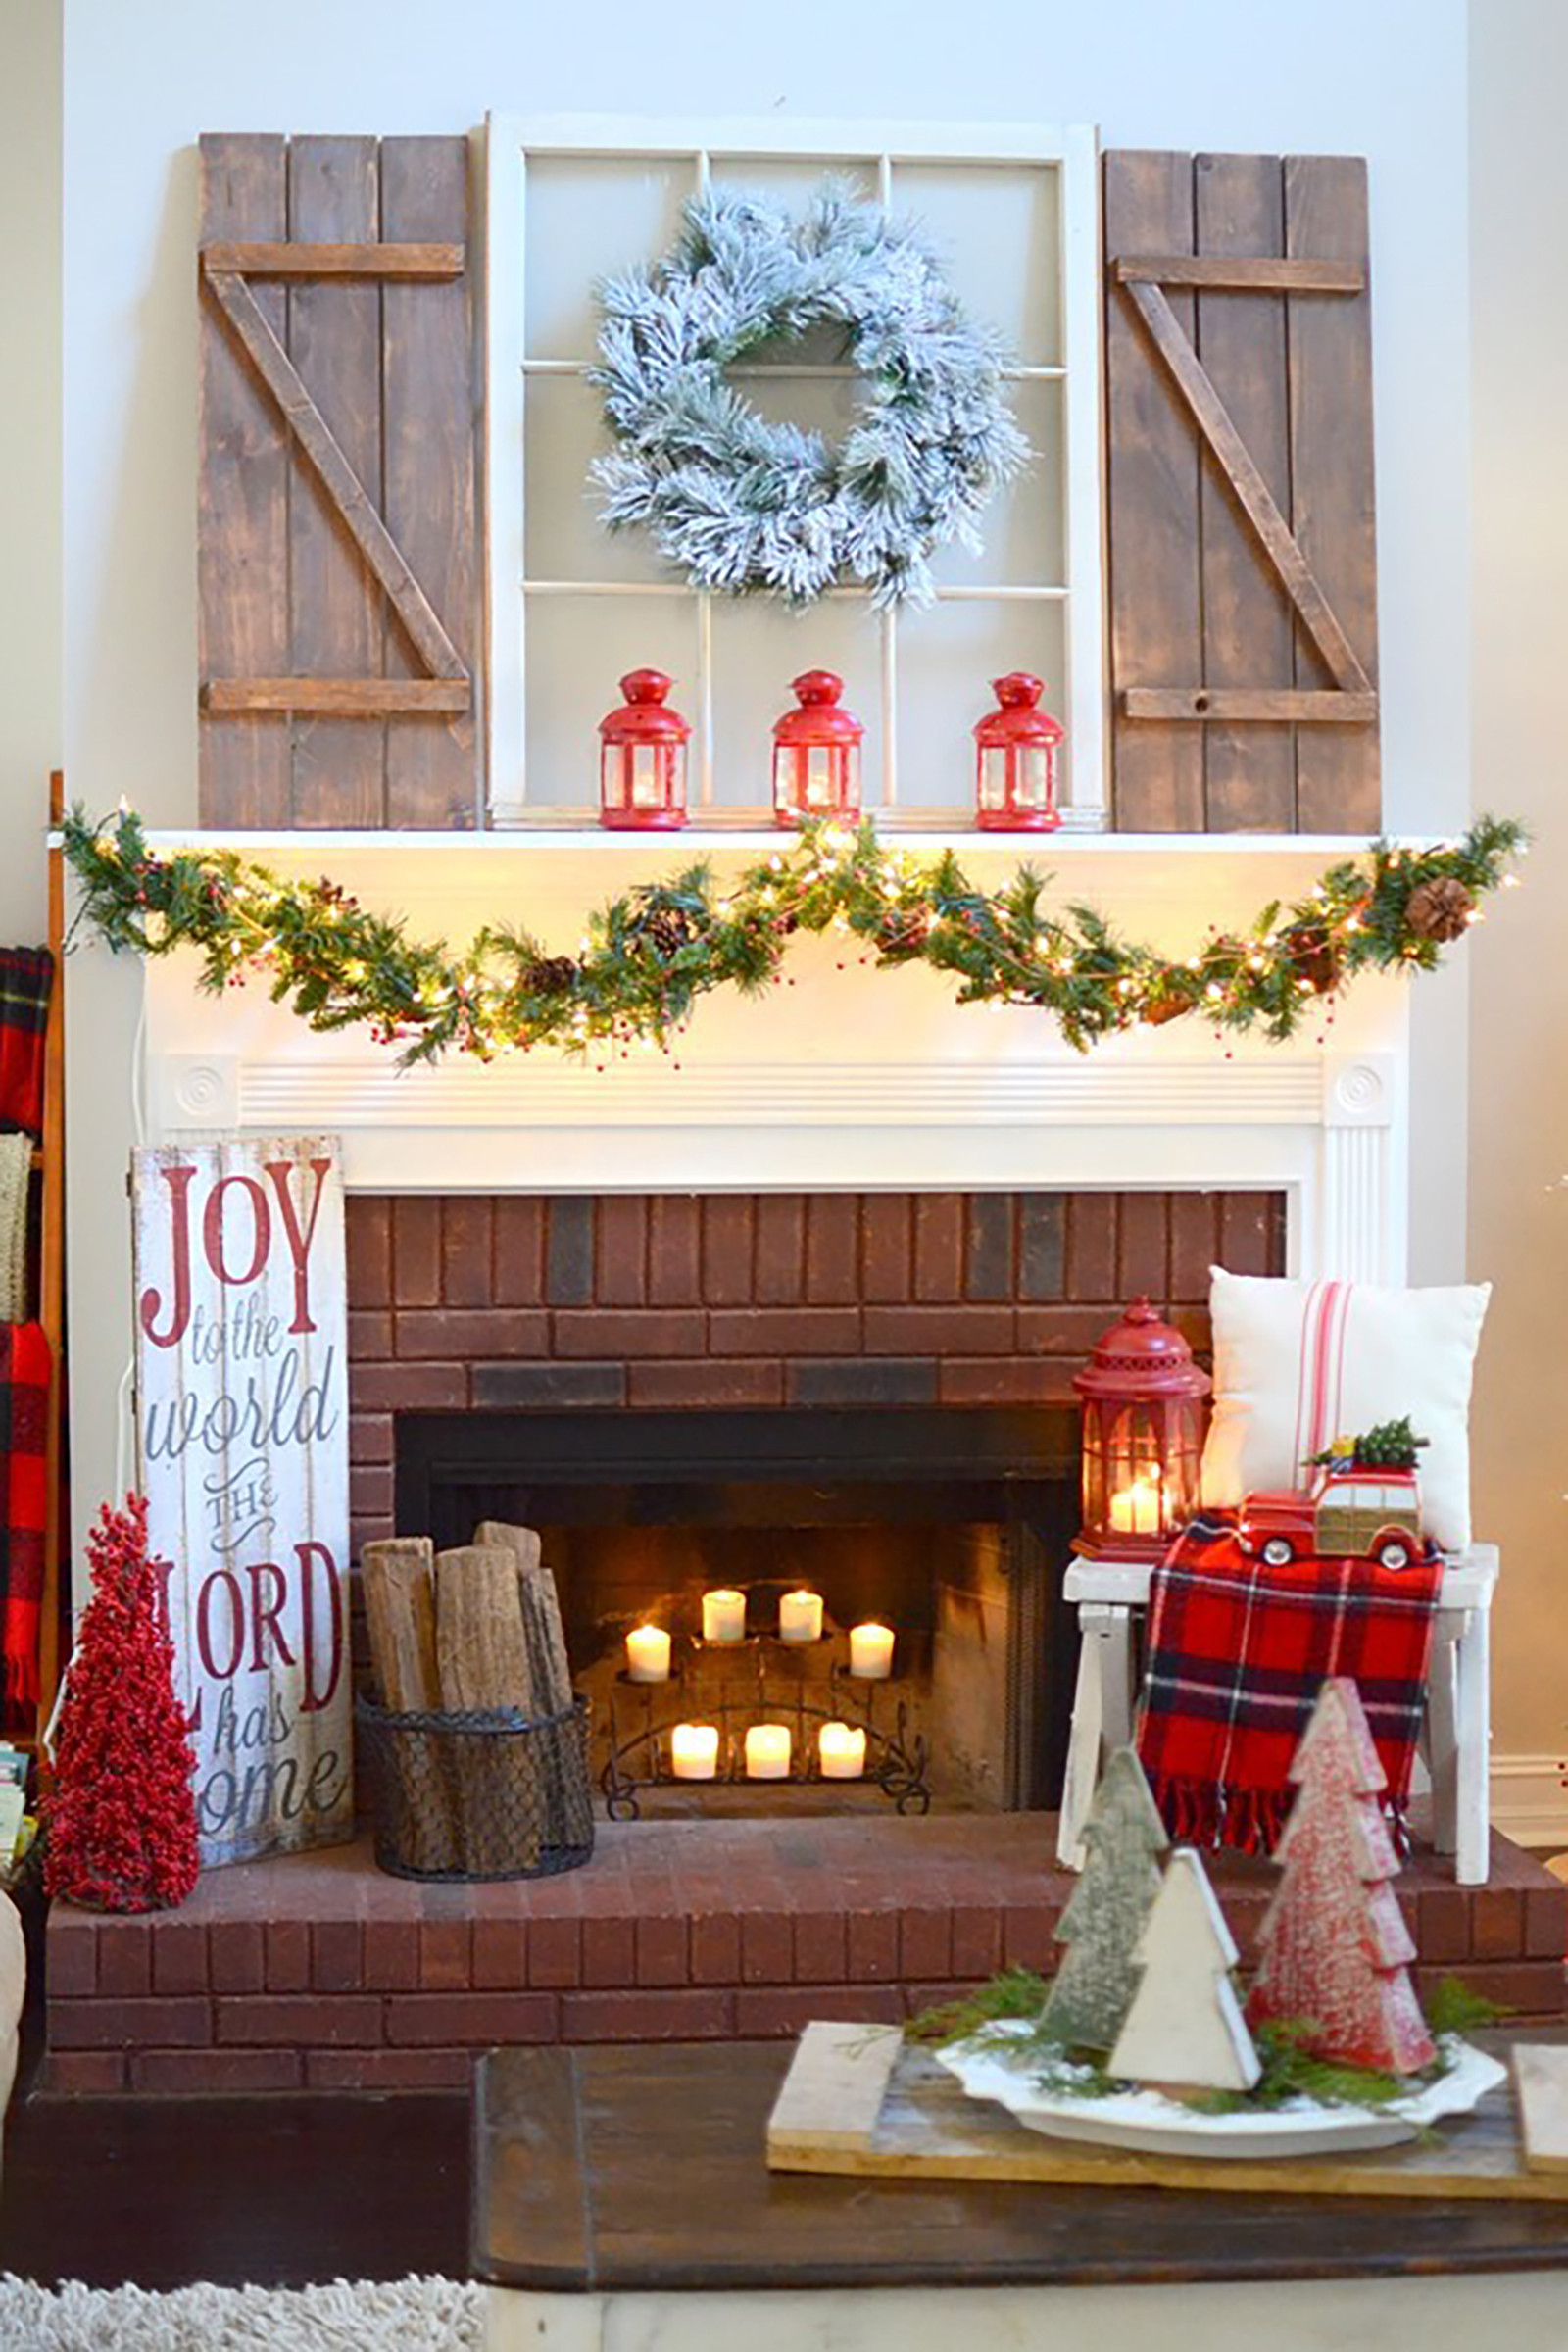 Decorating Fireplace For Christmas
 35 Christmas Mantel Decorations Ideas for Holiday